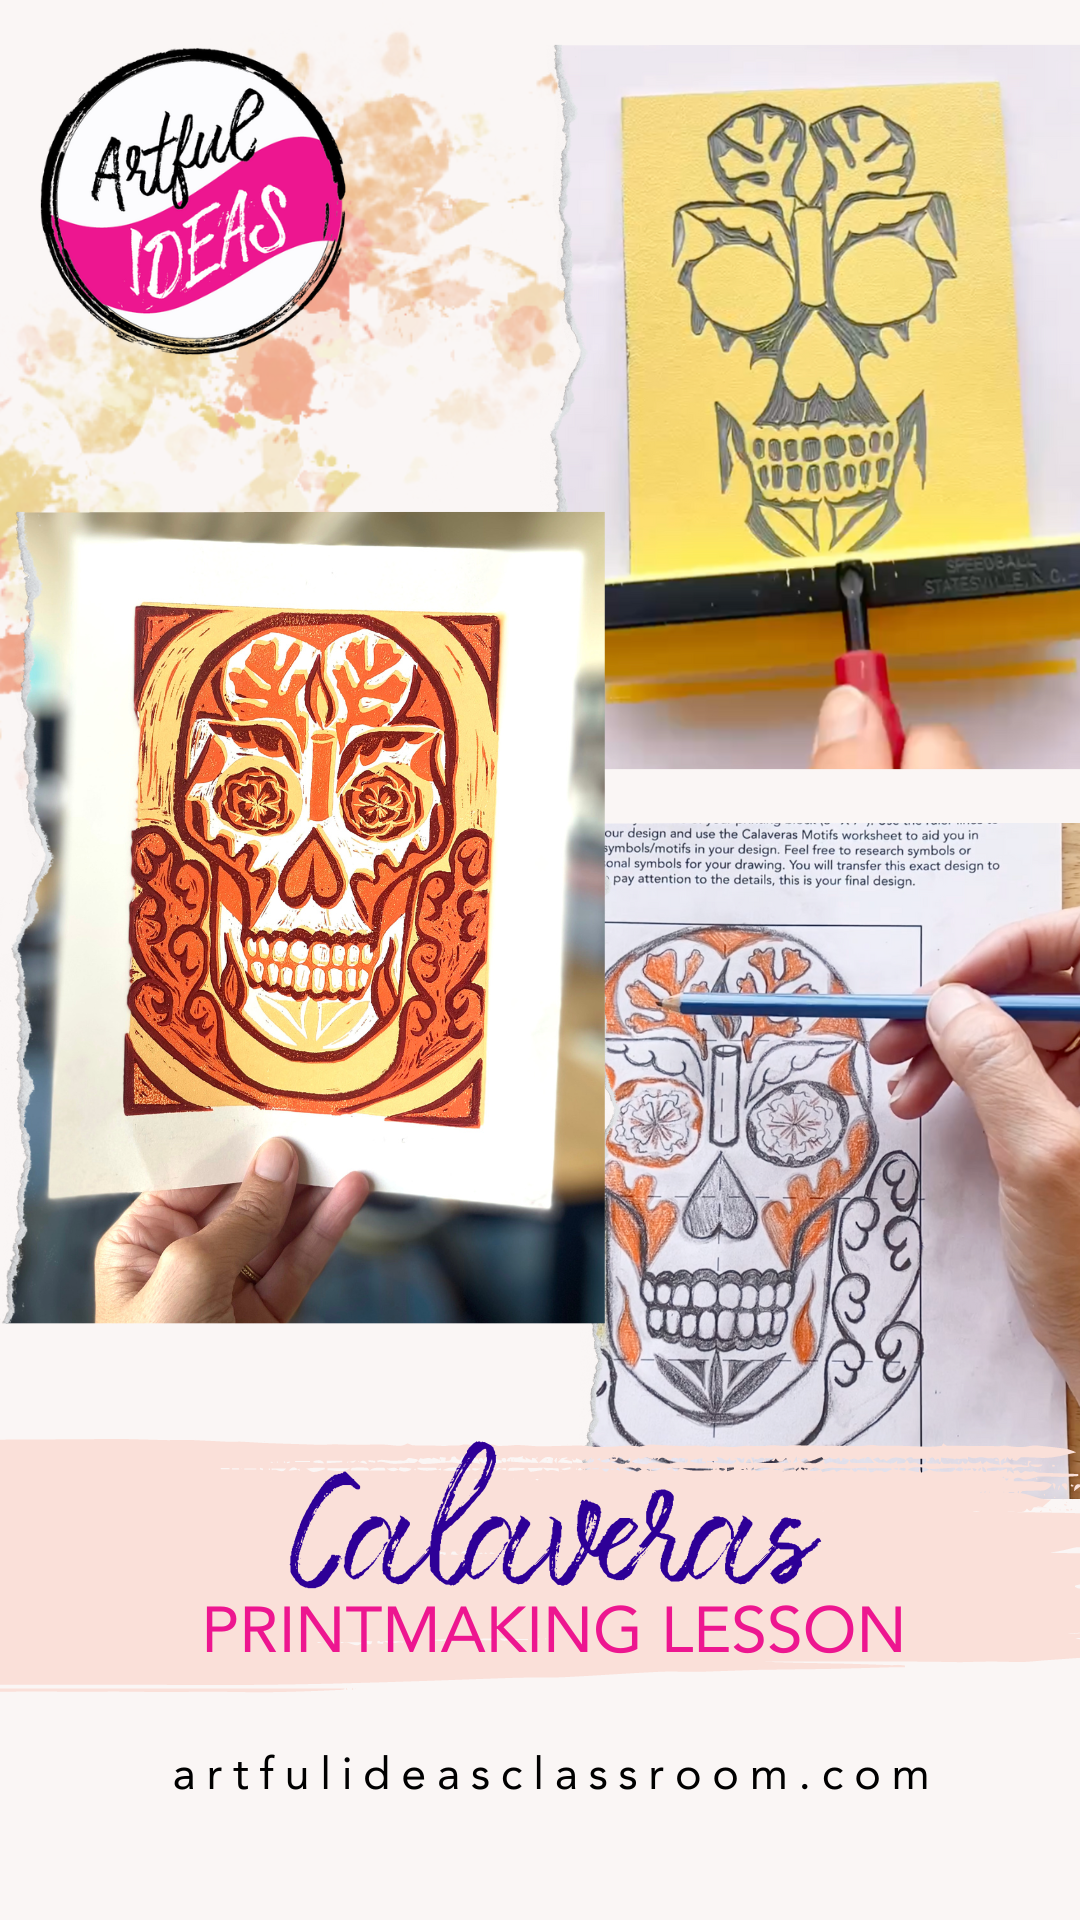 Group of 3 photos and text showing the process to create a three color reduction print of a calavera or skull figure popular during the Mexican holiday Día de los Muertos